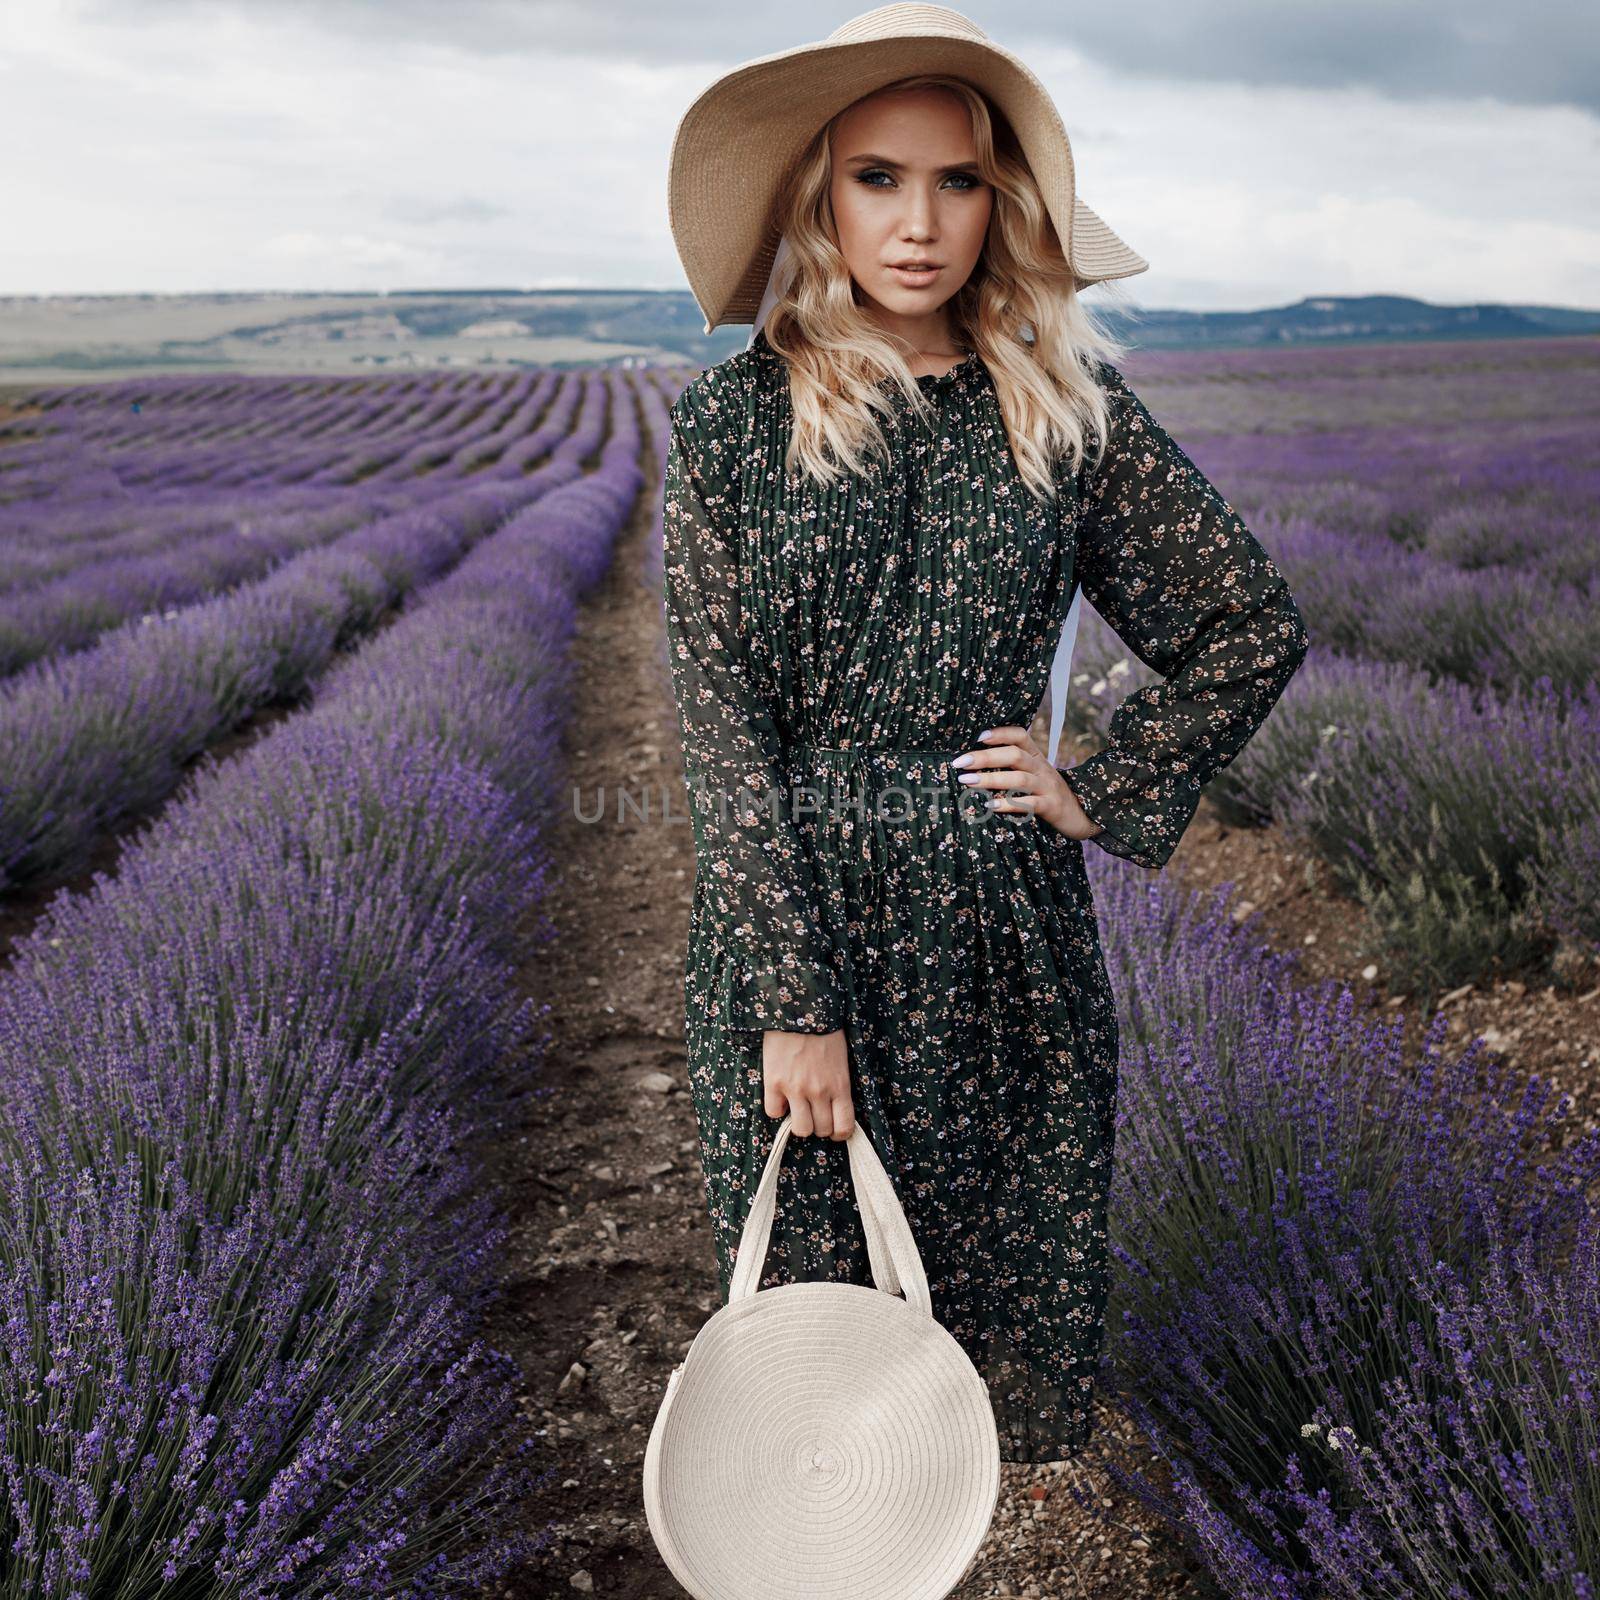 Fashion portrait of a pretty young woman in lavender field in hat with bag by splash